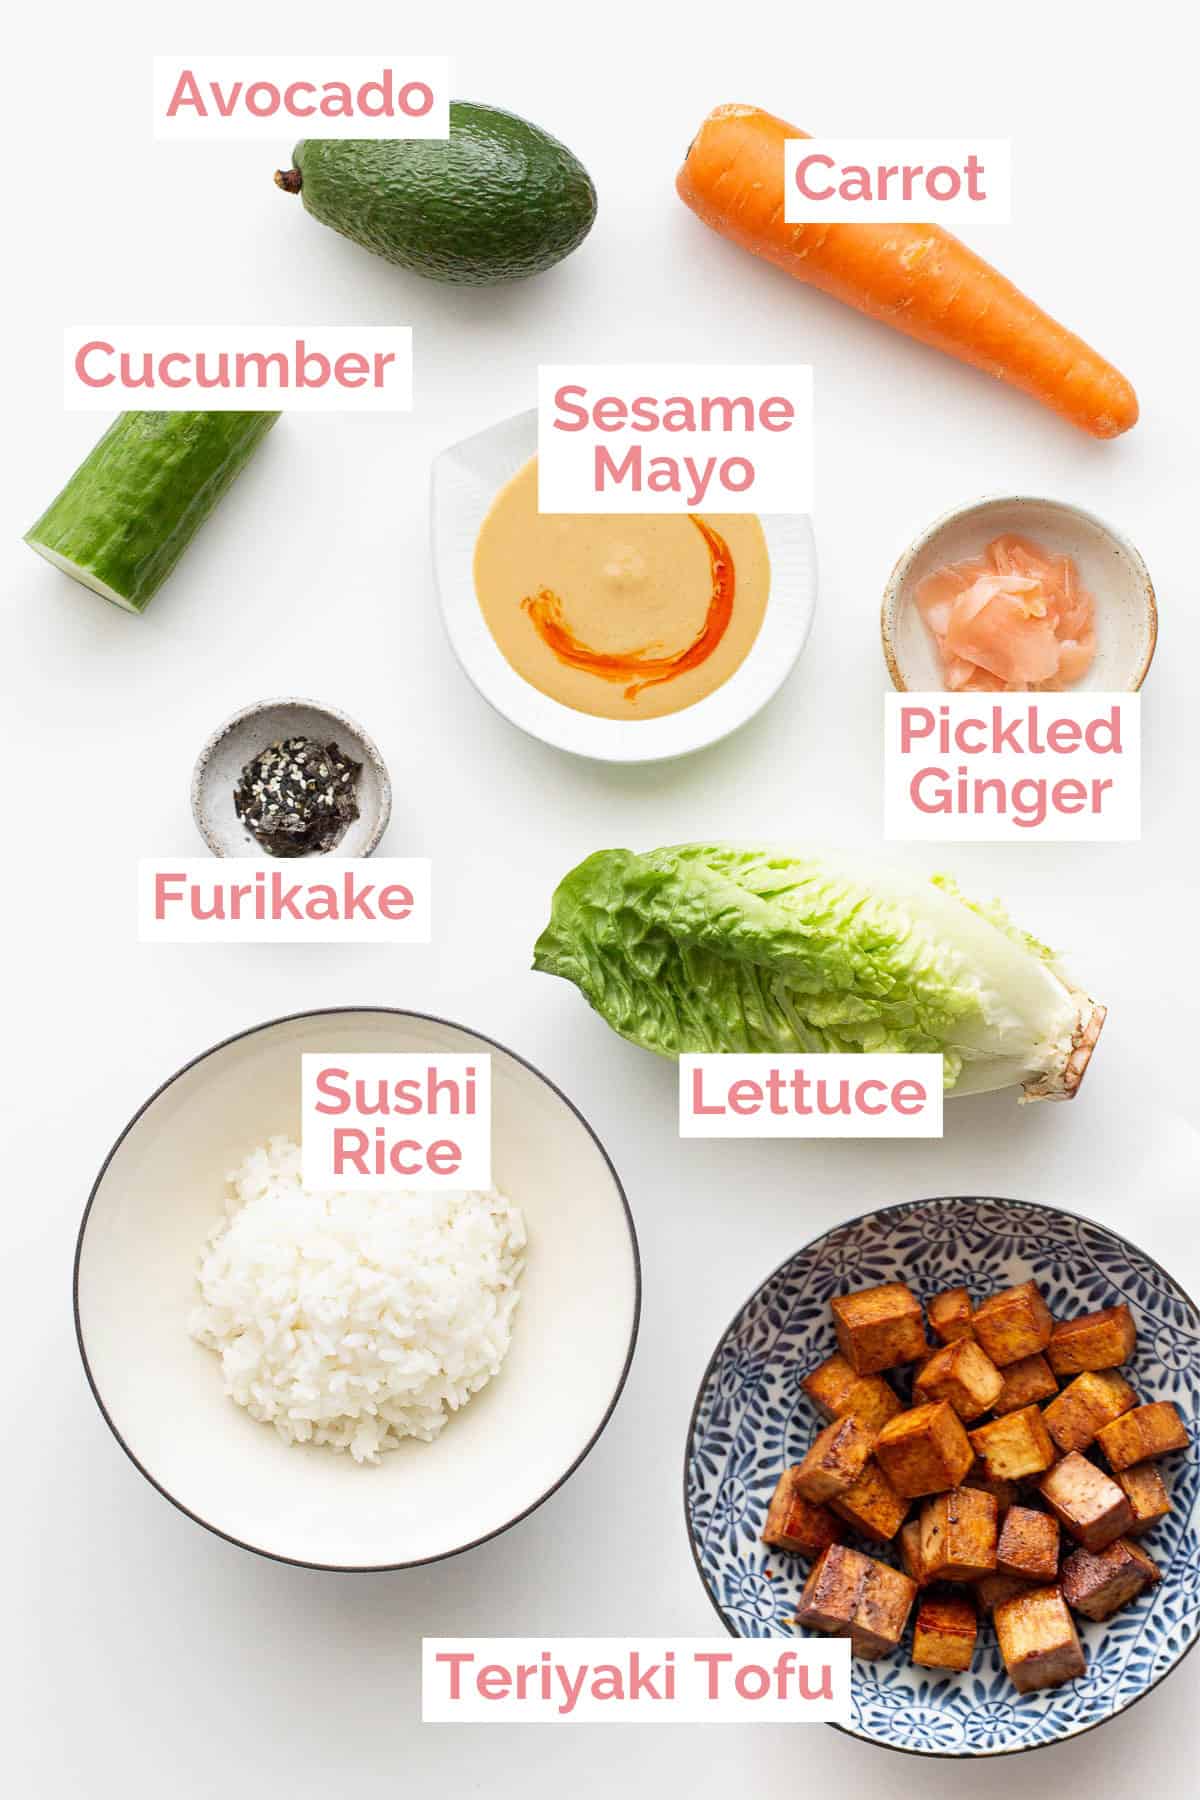 All the sushi bowl ingredients laid out.